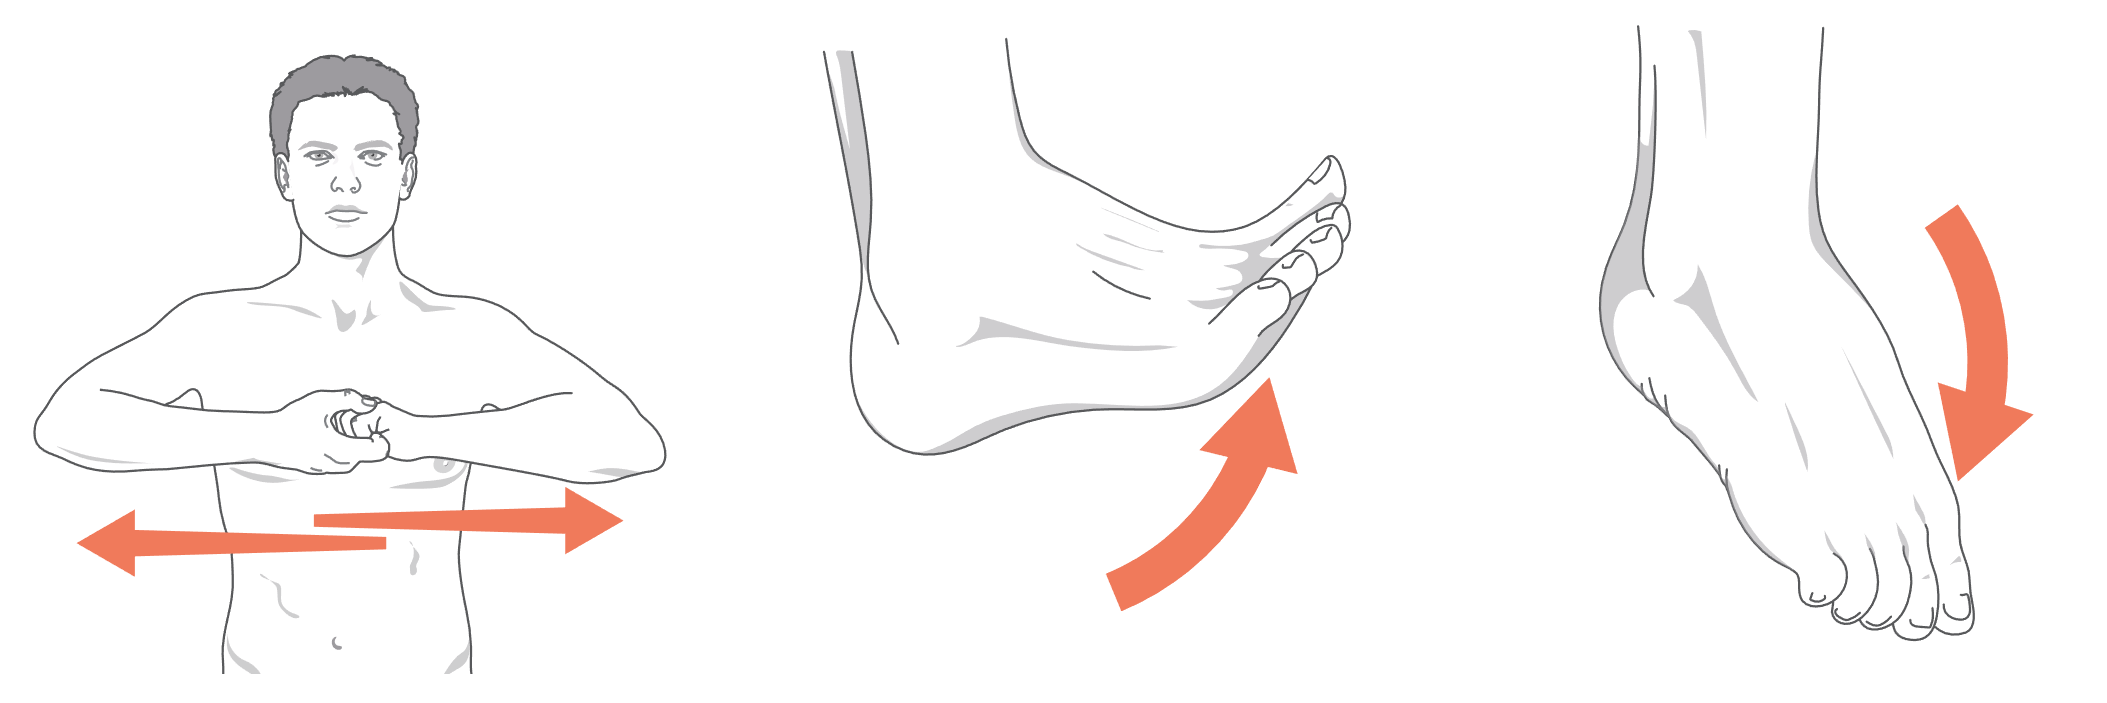 Three diagrams showing how to perform the Jendrassik maneuver. dorsiflex the foot, and plantarflex the foot.